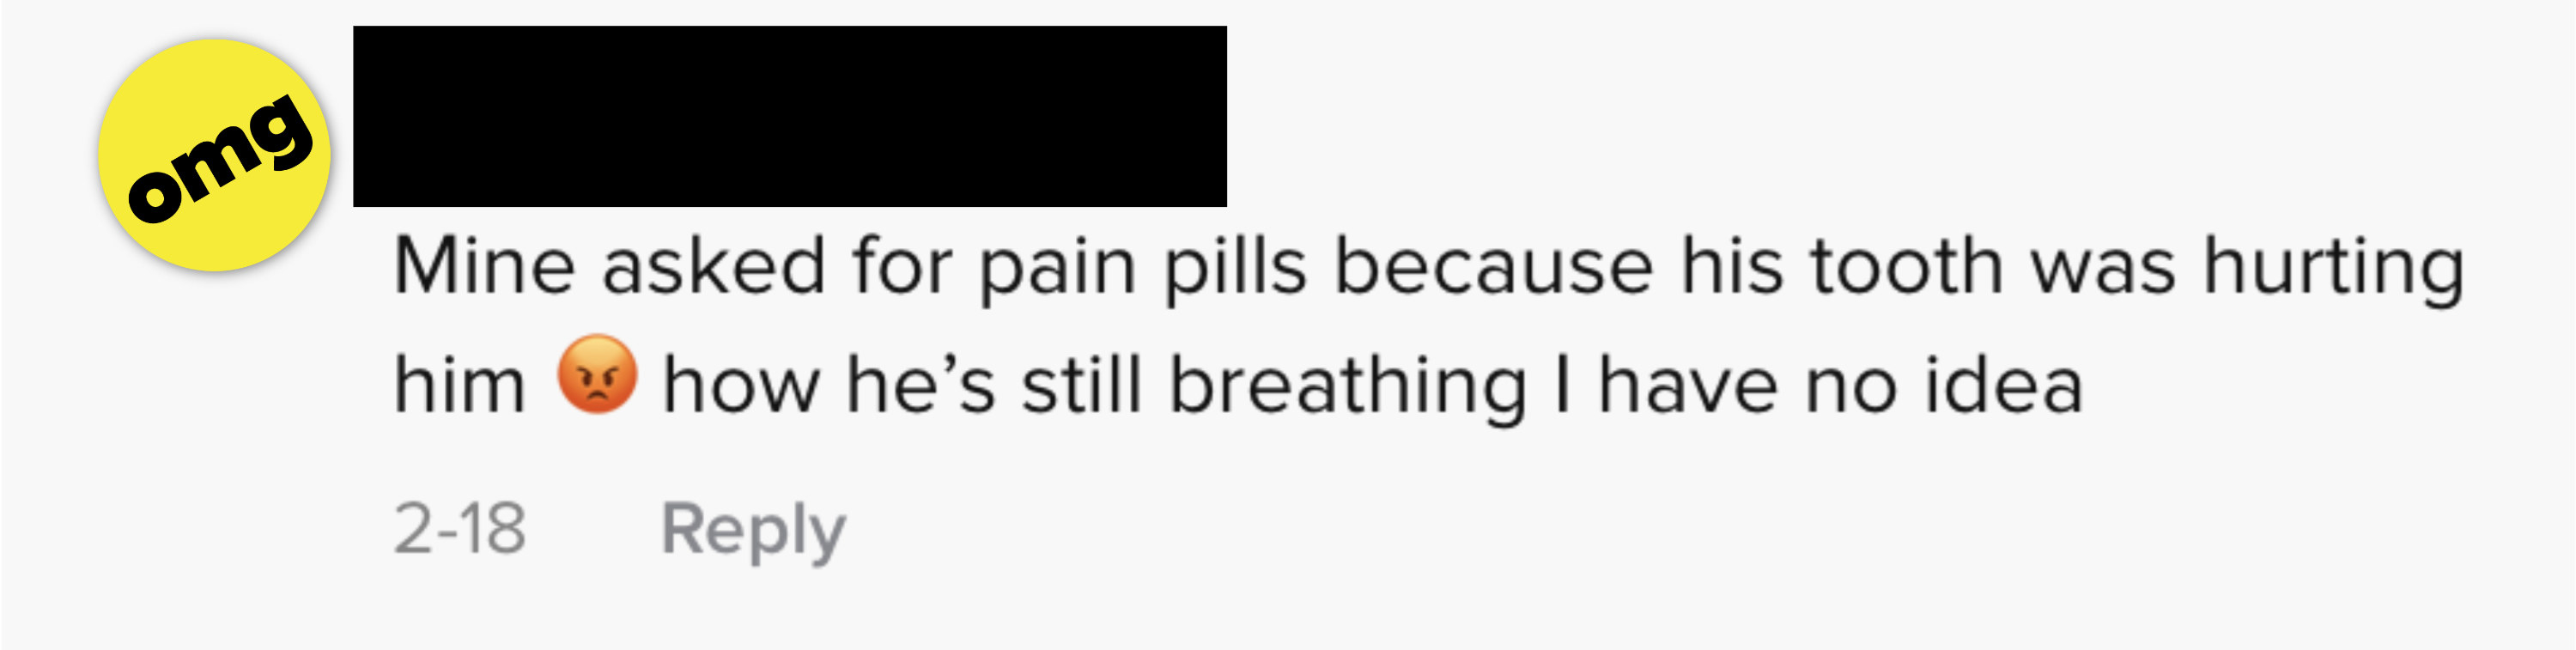 &quot;Mine asked for pain pills because his tooth was hurting him. How he&#x27;s breathing I have no idea&quot;